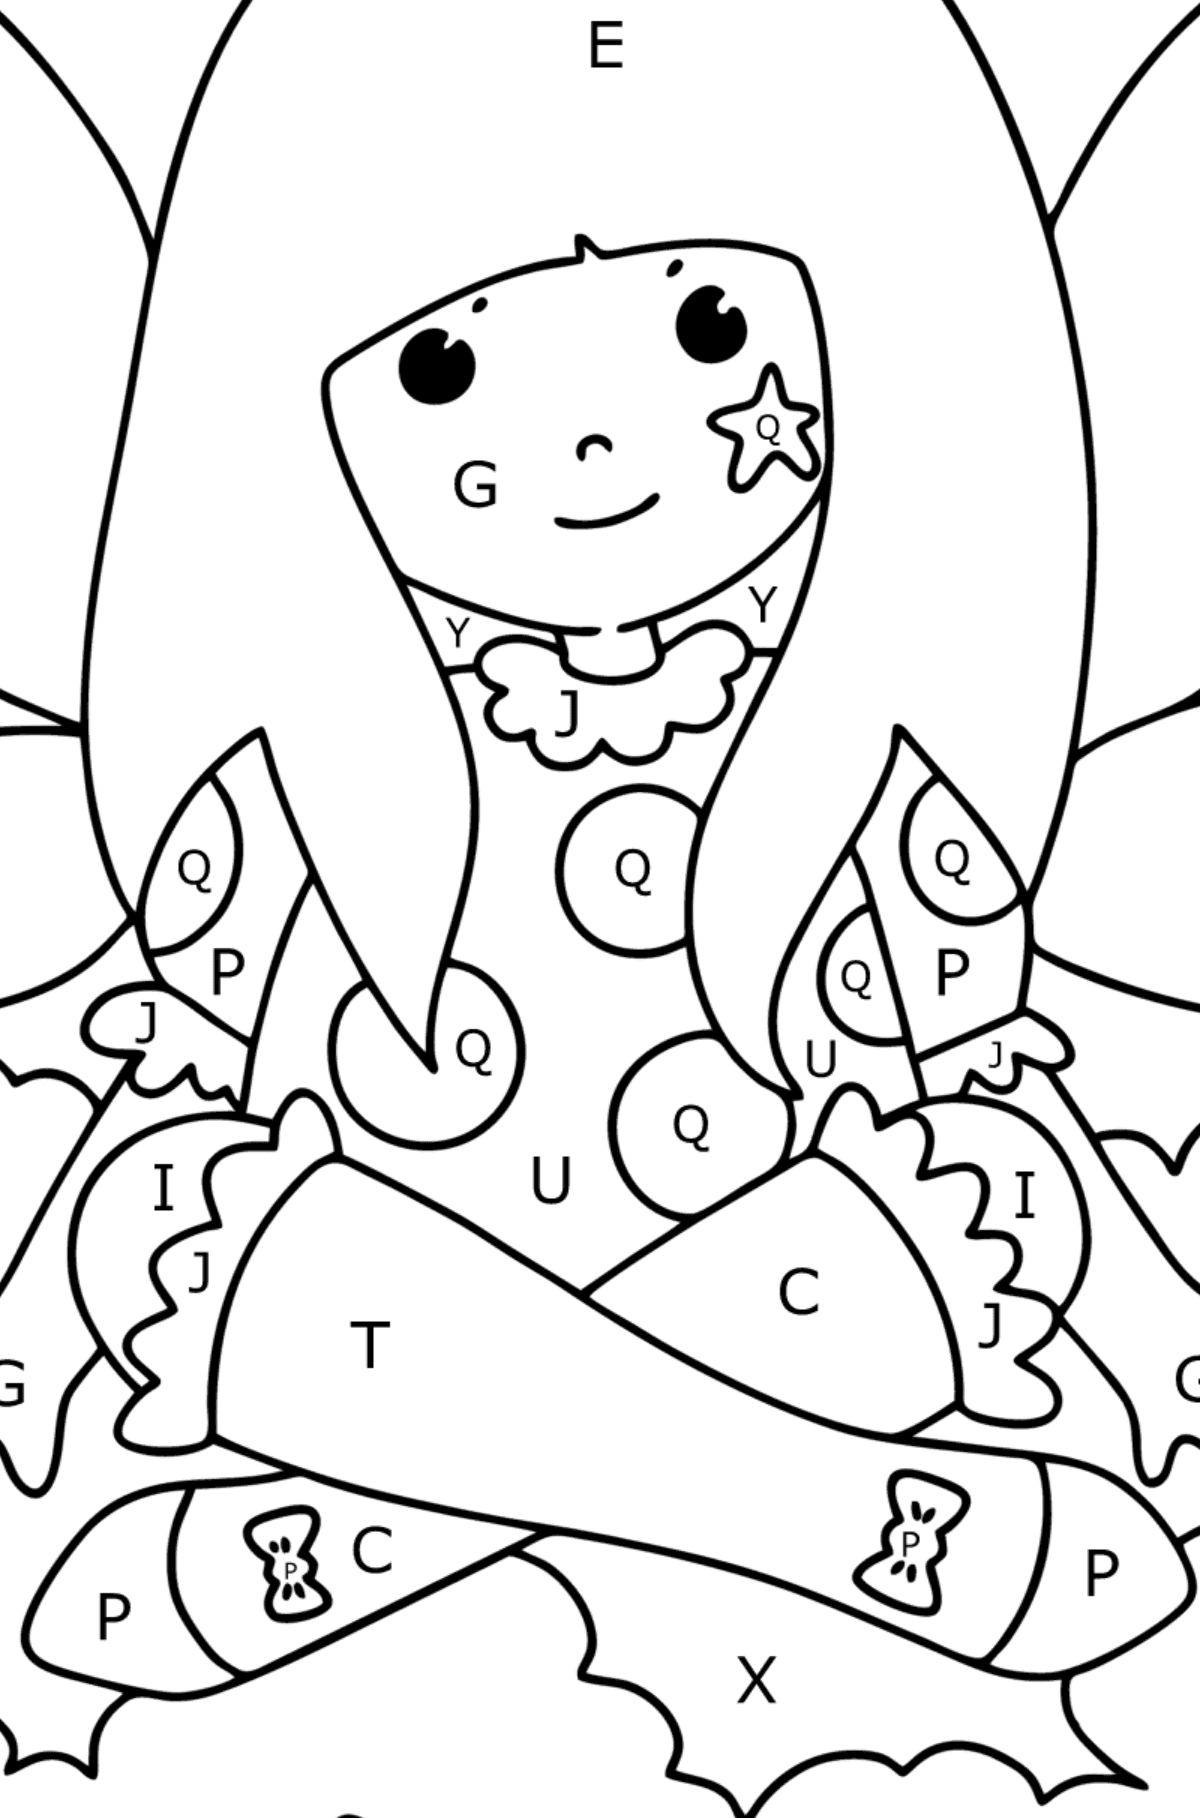 Cartoon fairy coloring page - Coloring by Letters for Kids